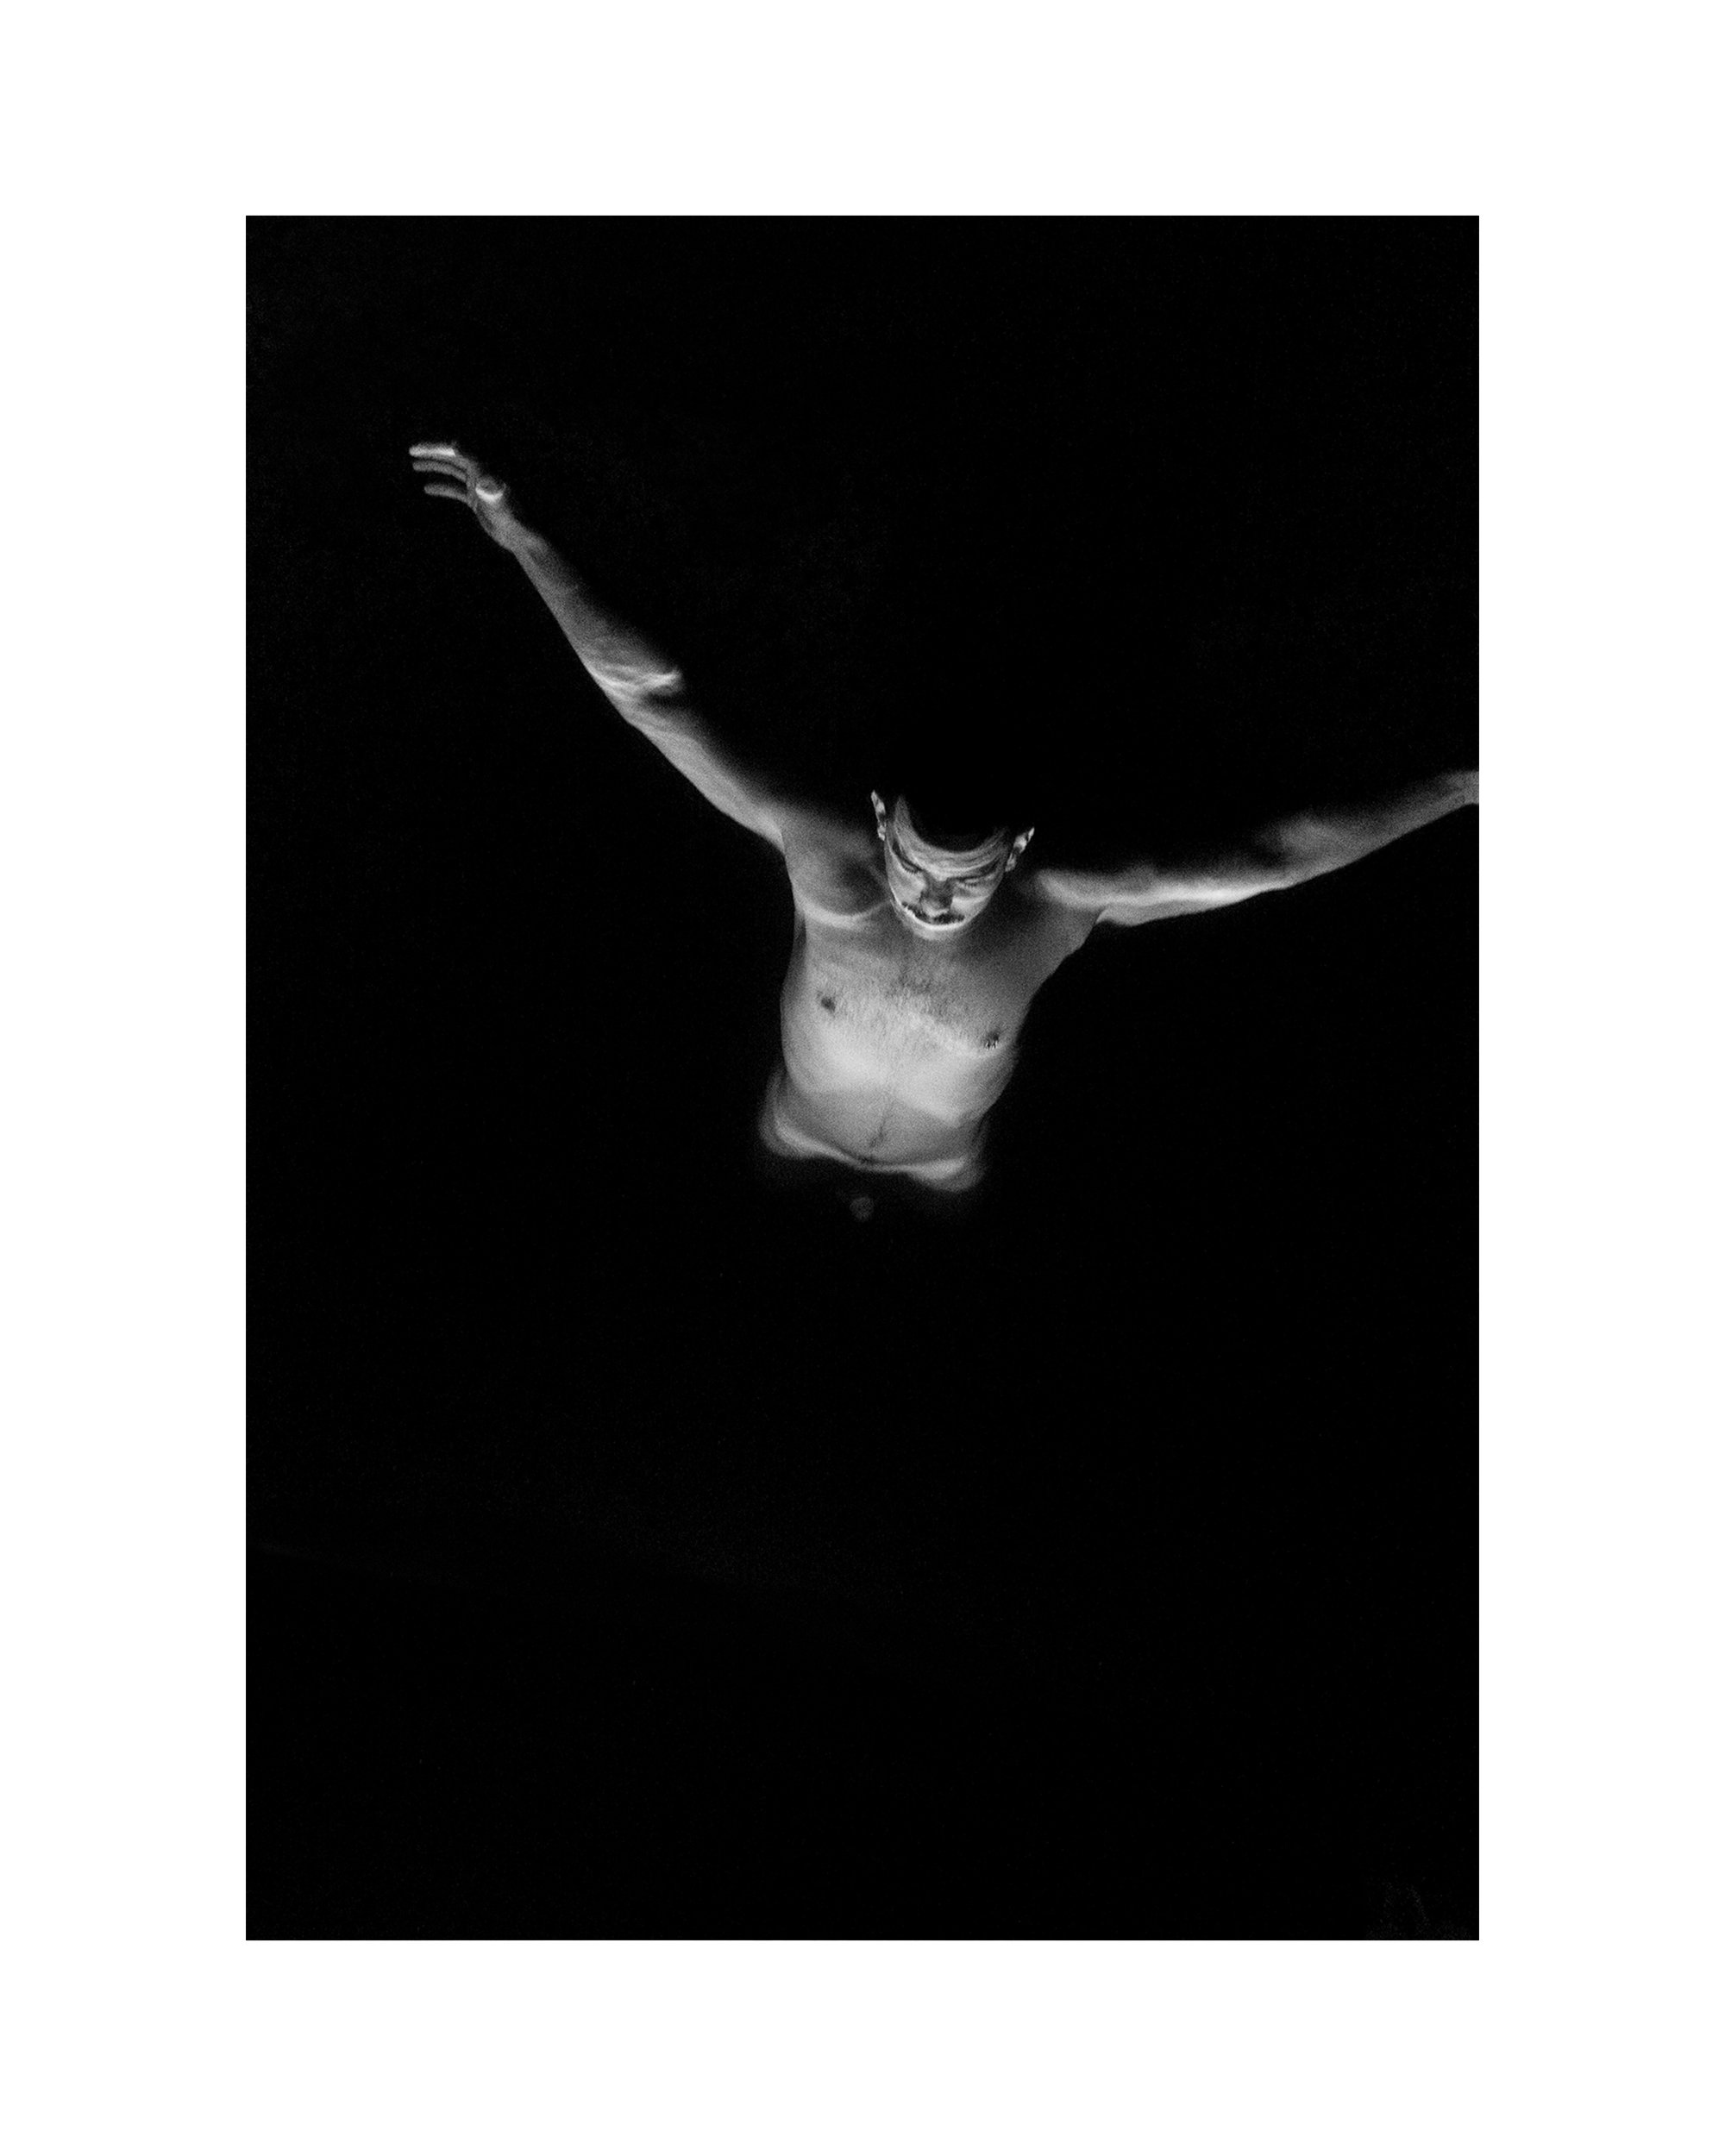   Matthew Floating/Abyss, Fire Island Pines, 08.26.23  